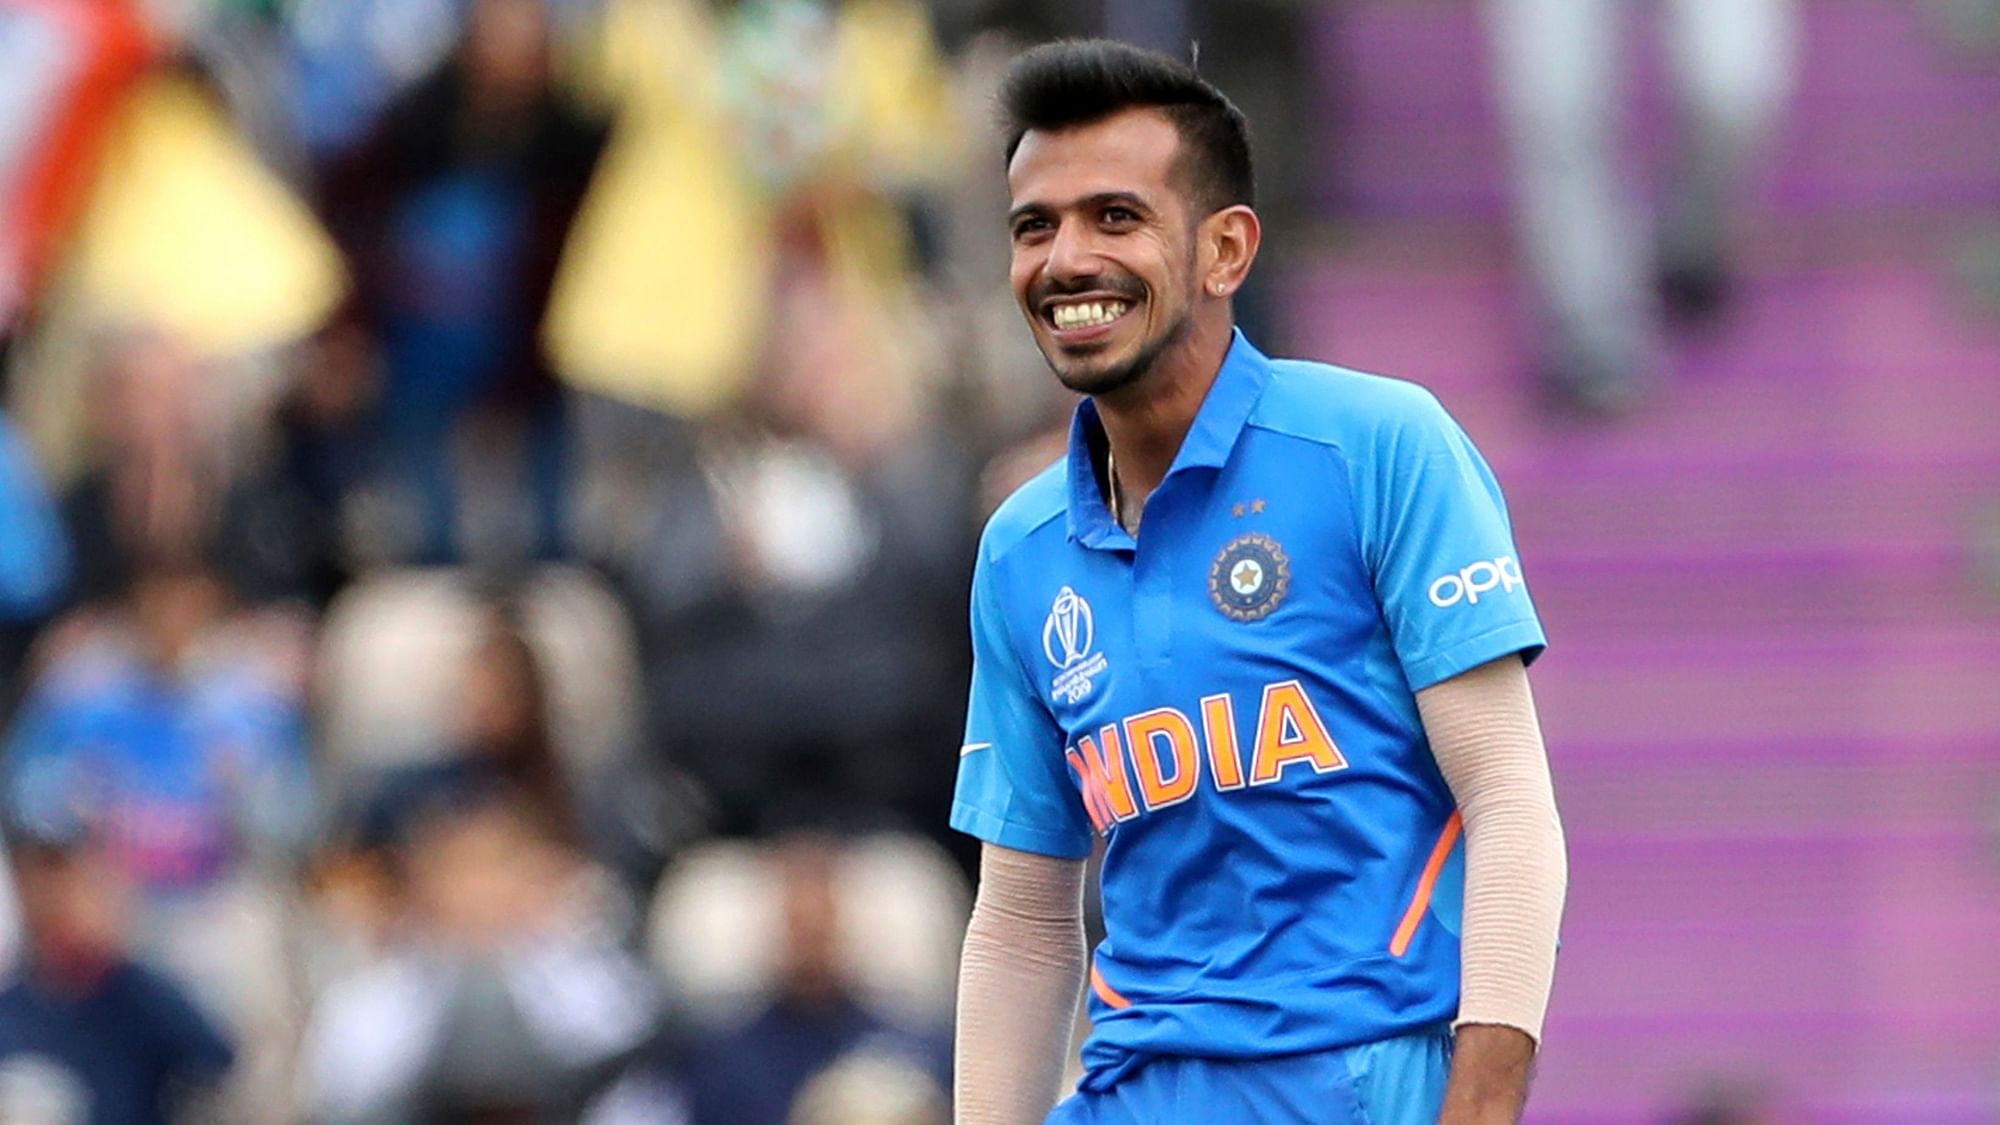 Chahal’s crucial spell – which saw him scalp four wickets – kept stifling the Proteas just when they were rebuilding after Bumrah’s early shocks. 